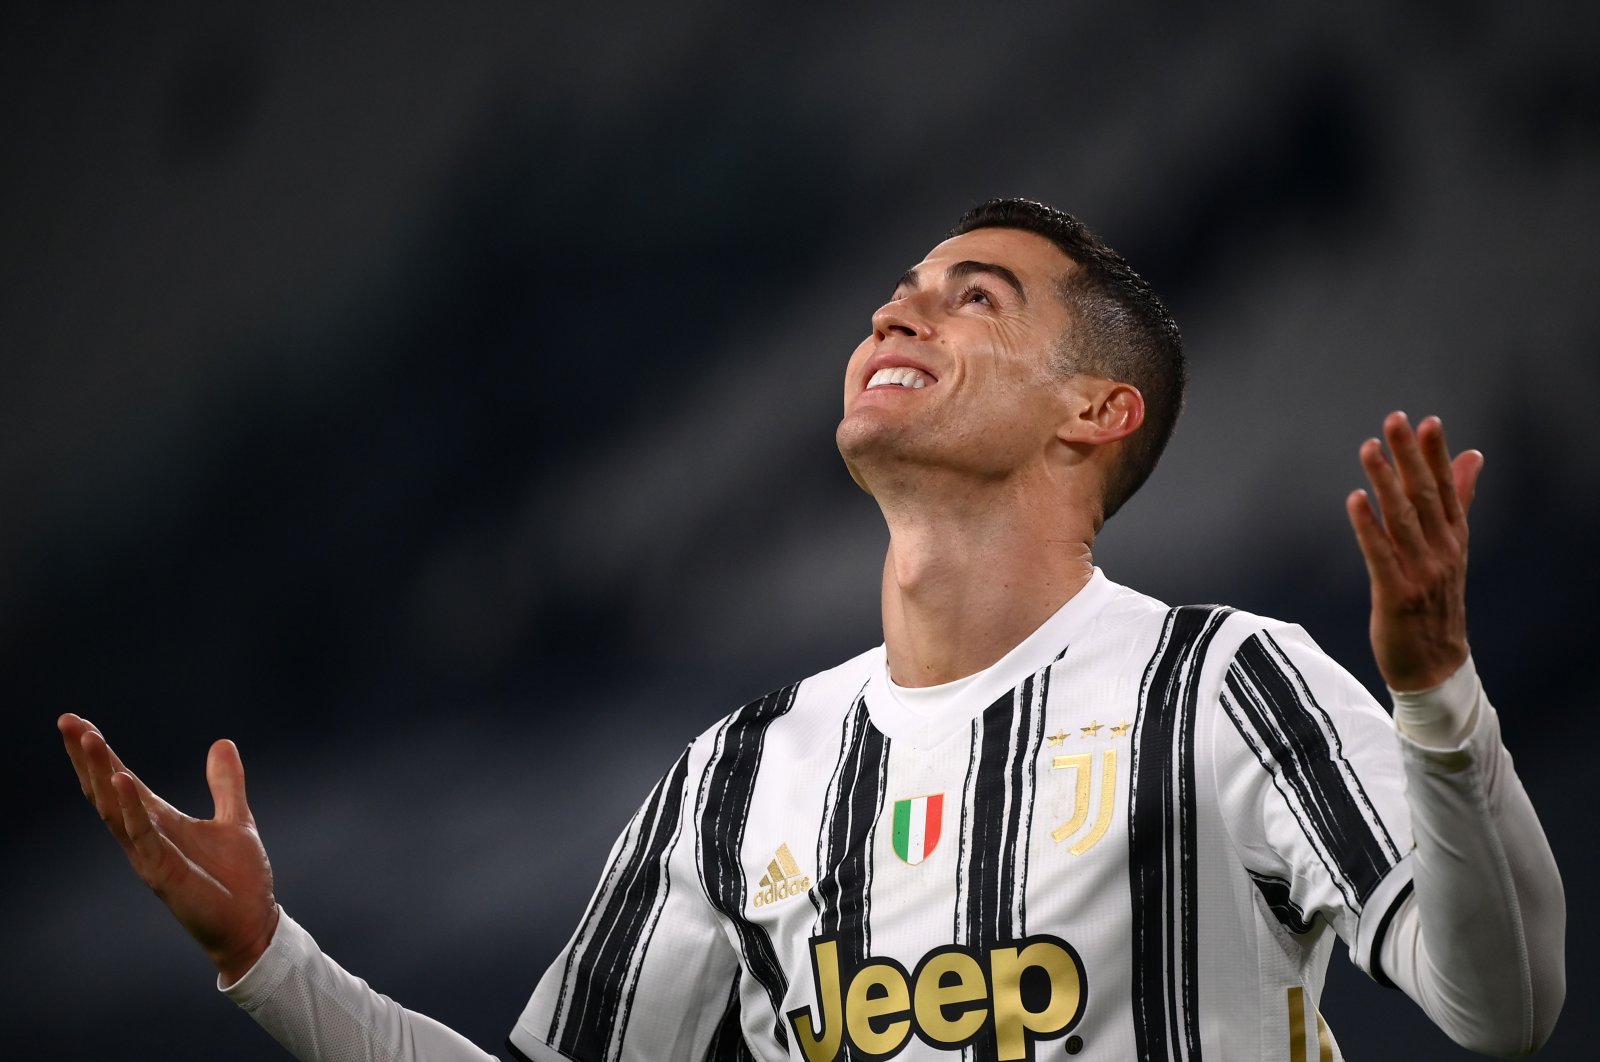 Juventus' Cristiano Ronaldo reacts after missing a goal opportunity during the Italian Cup semifinal against Inter Milan, in Turin, Italy, Feb. 9, 2021. (AFP Photo)